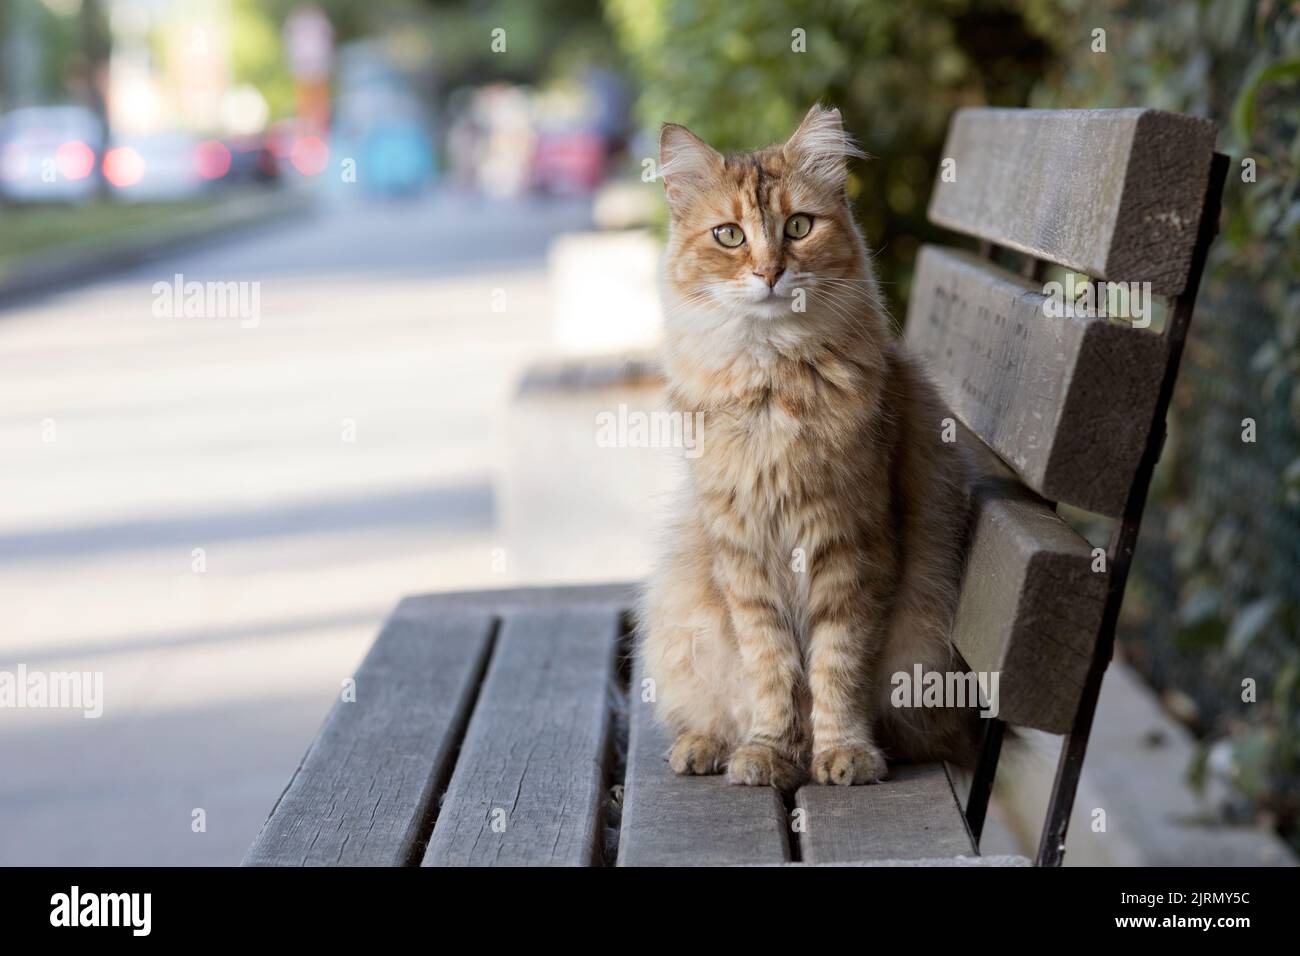 Slanted eye tabby cat outdoors in front portrait, sitting upright on a bench with closed mouth, looking at lens. Stock Photo